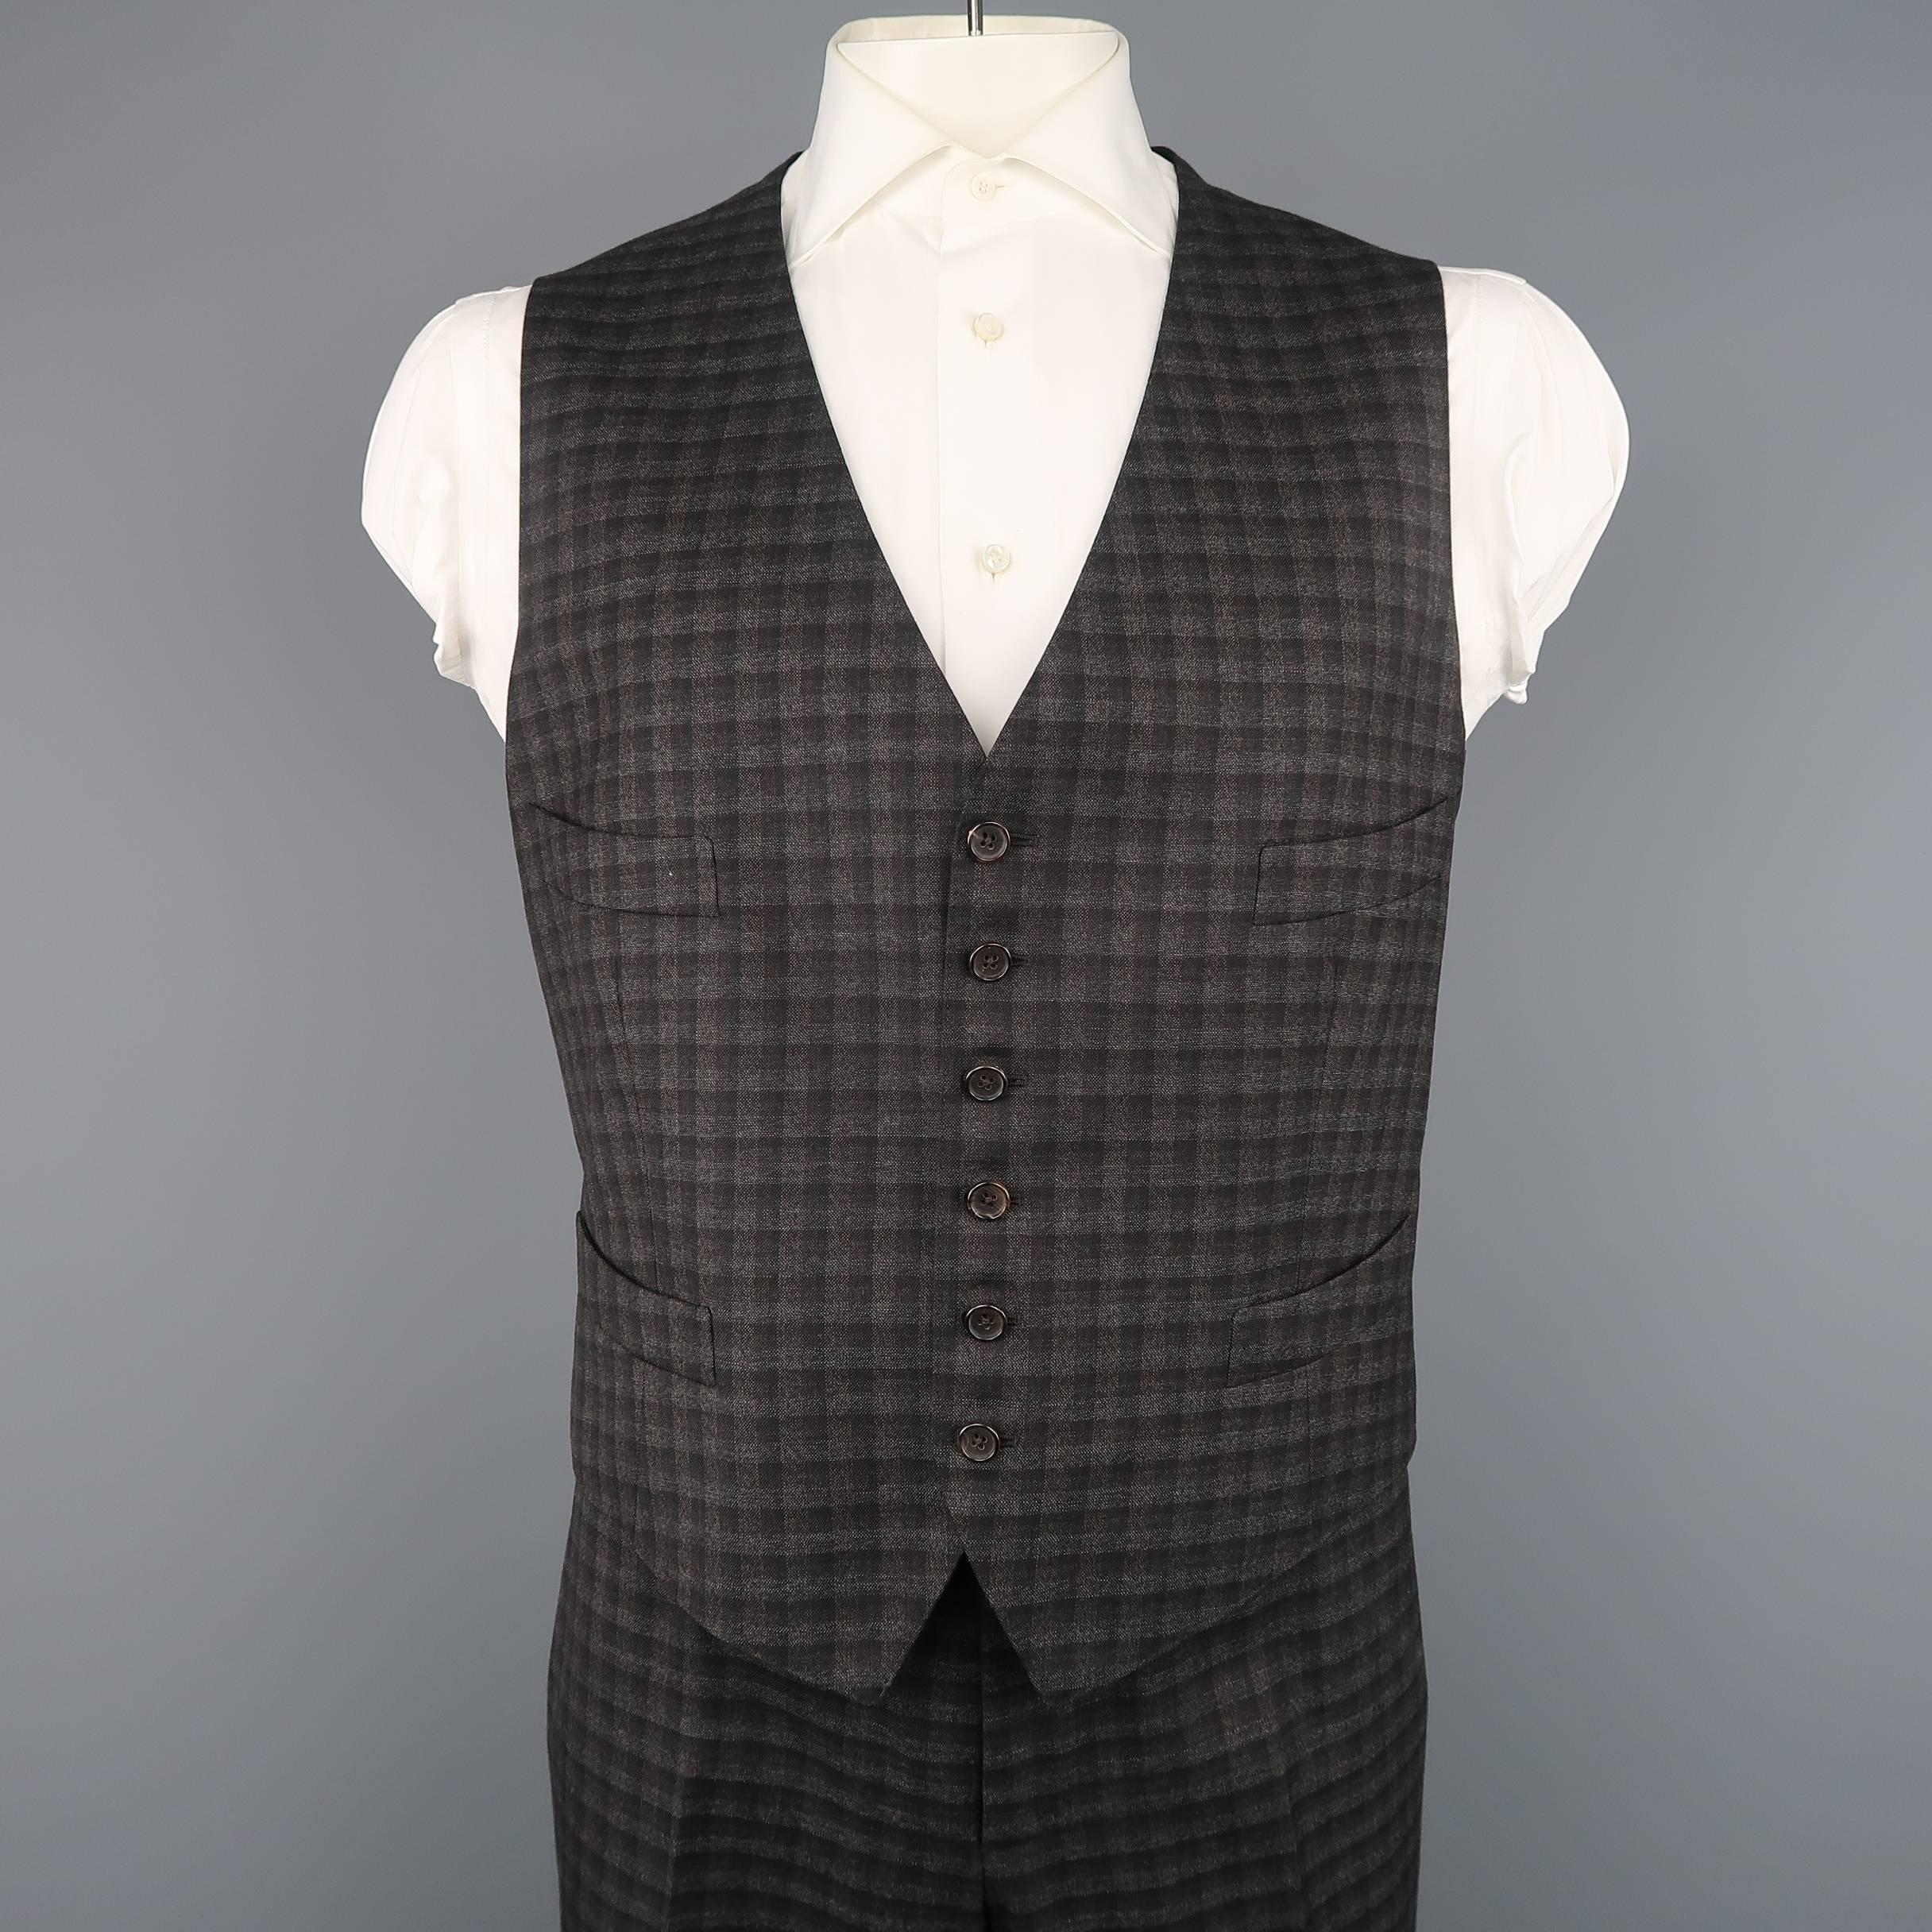 Gray Tom Ford Suit - Men's Grey and Brown Checkered Tartan Wool Three Piece Jacket